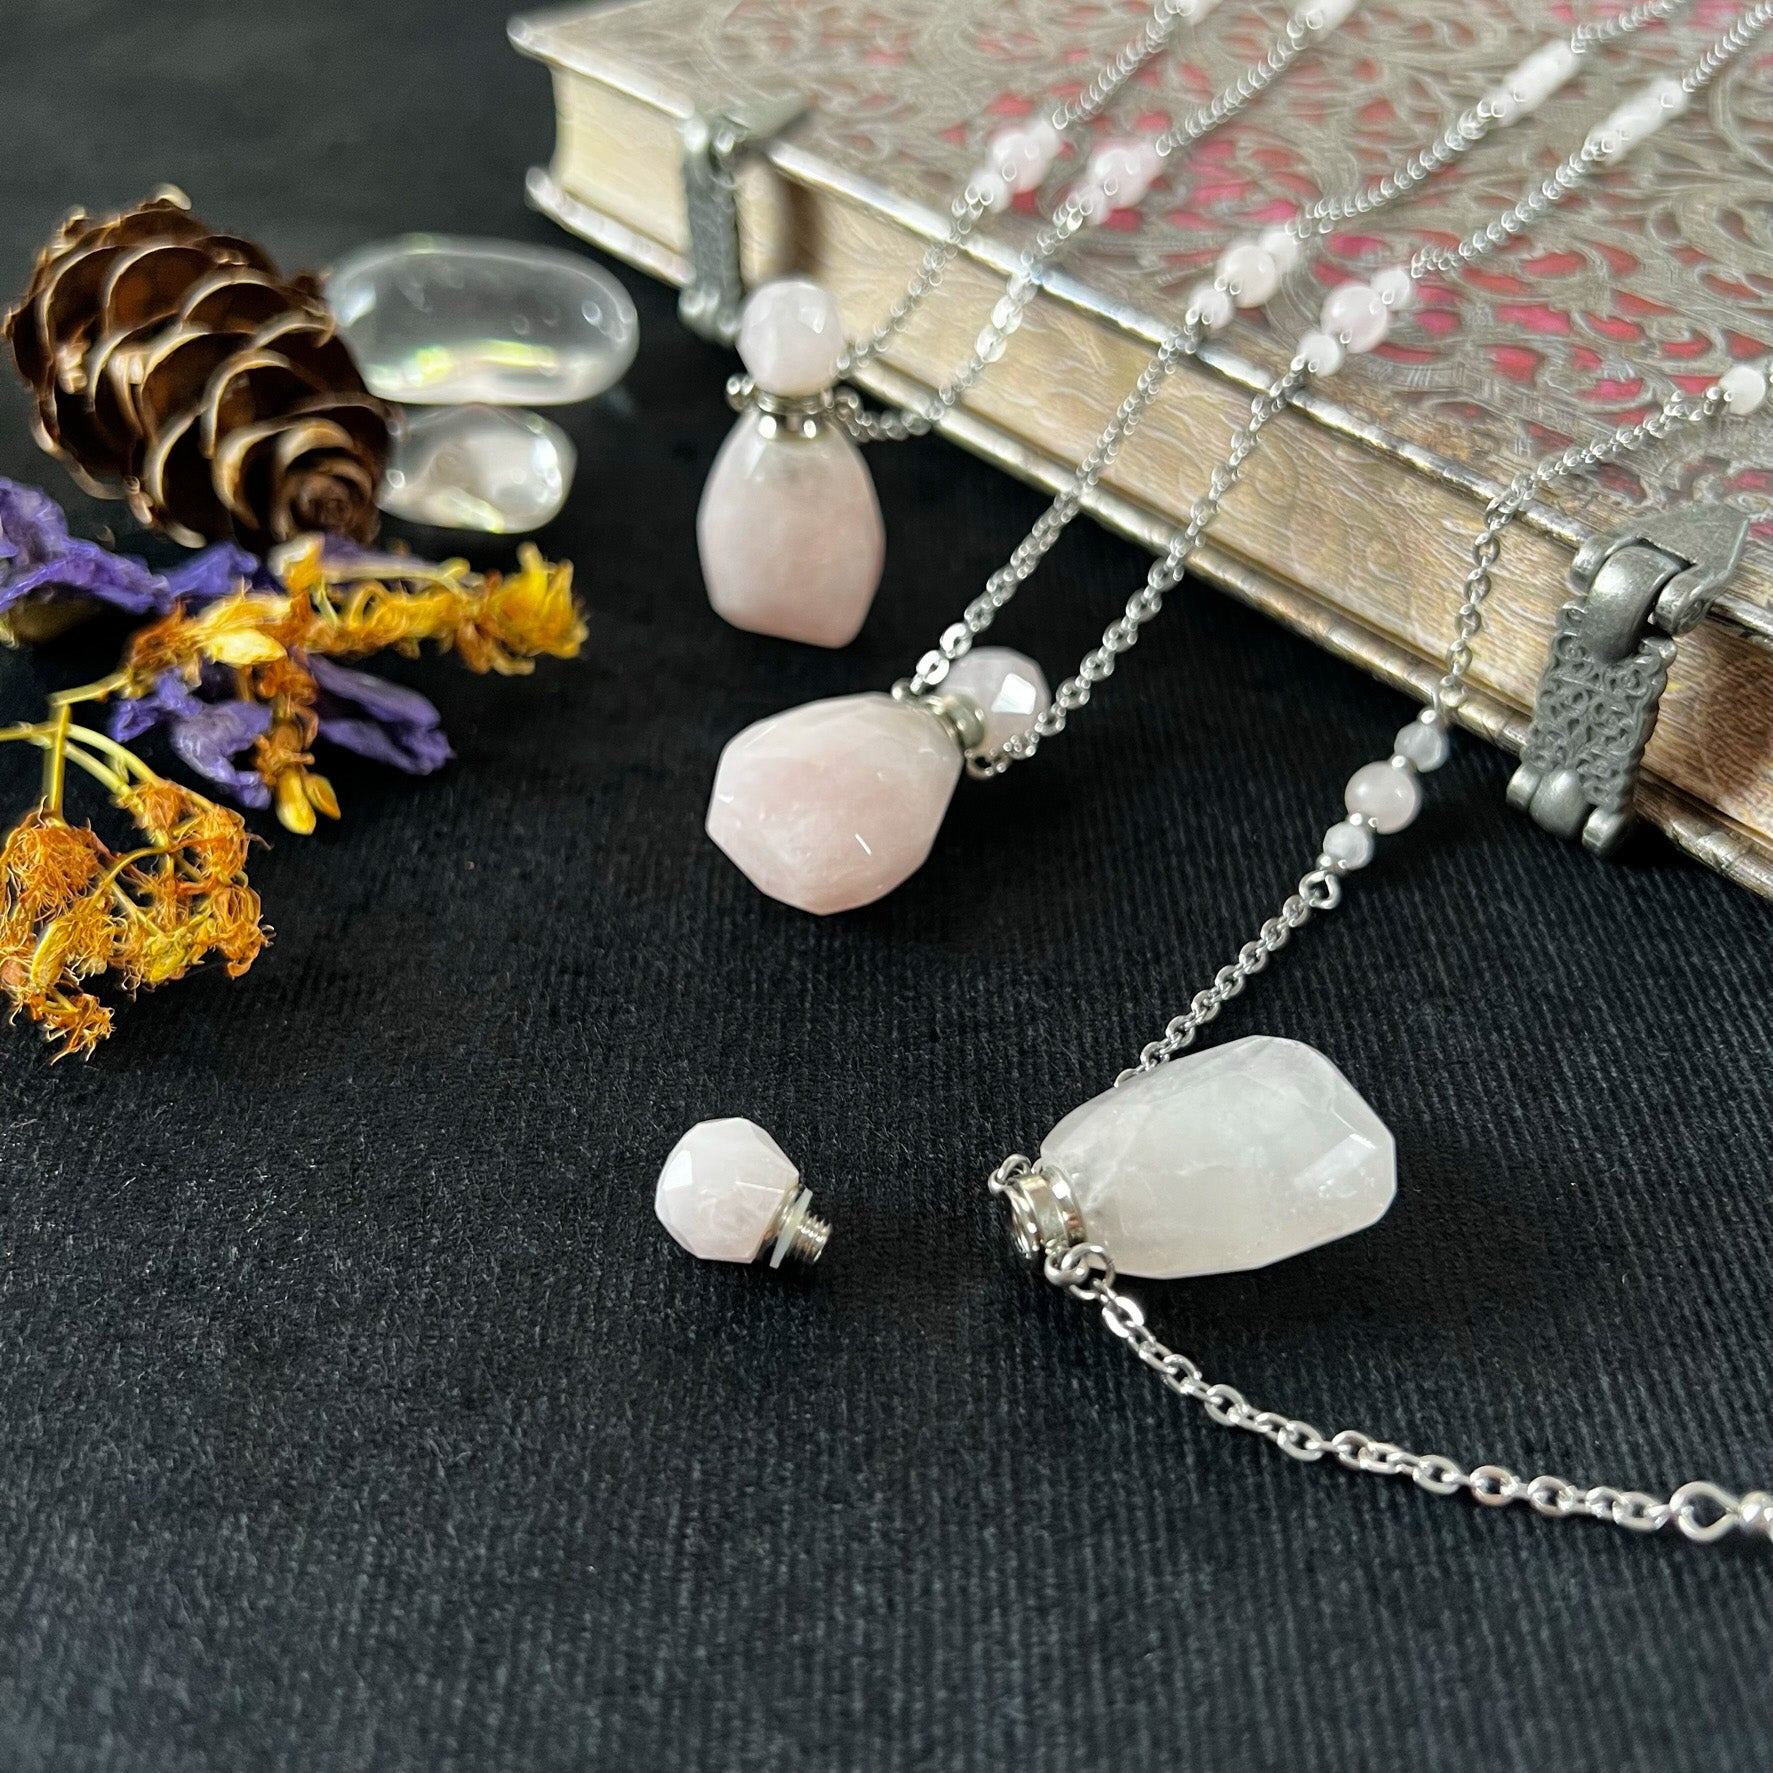 Perfume and potion bottle necklace in rose quartz and stainless steel Baguette Magick